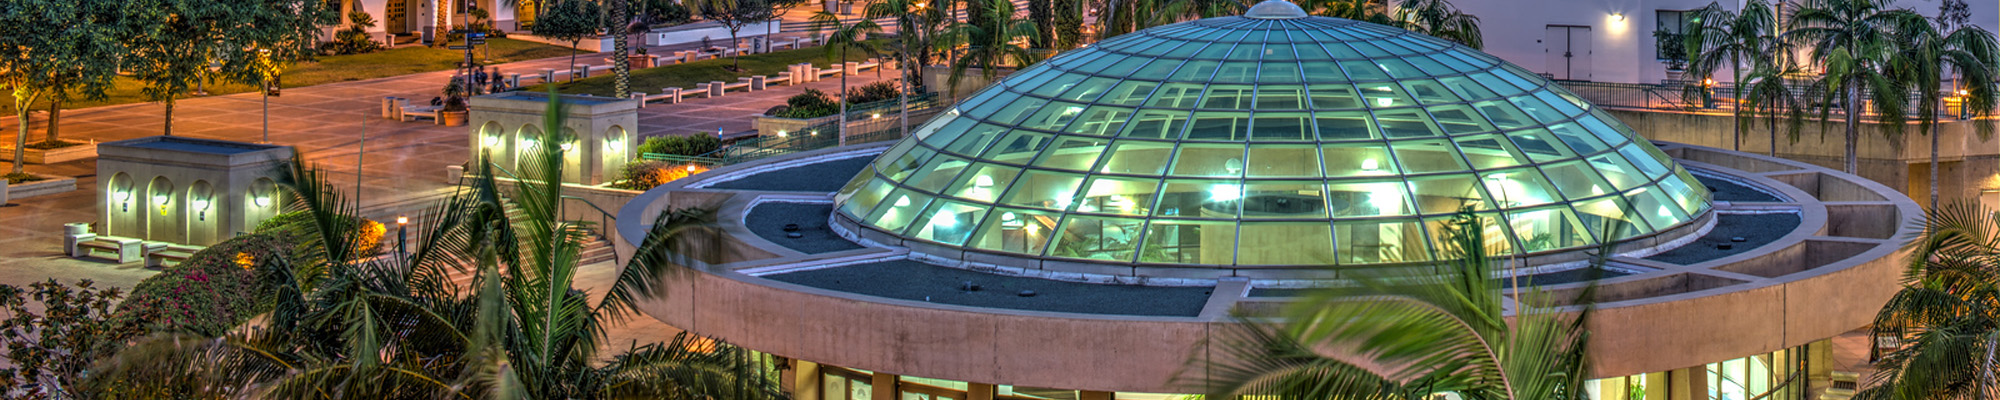 SDSI library dome at night